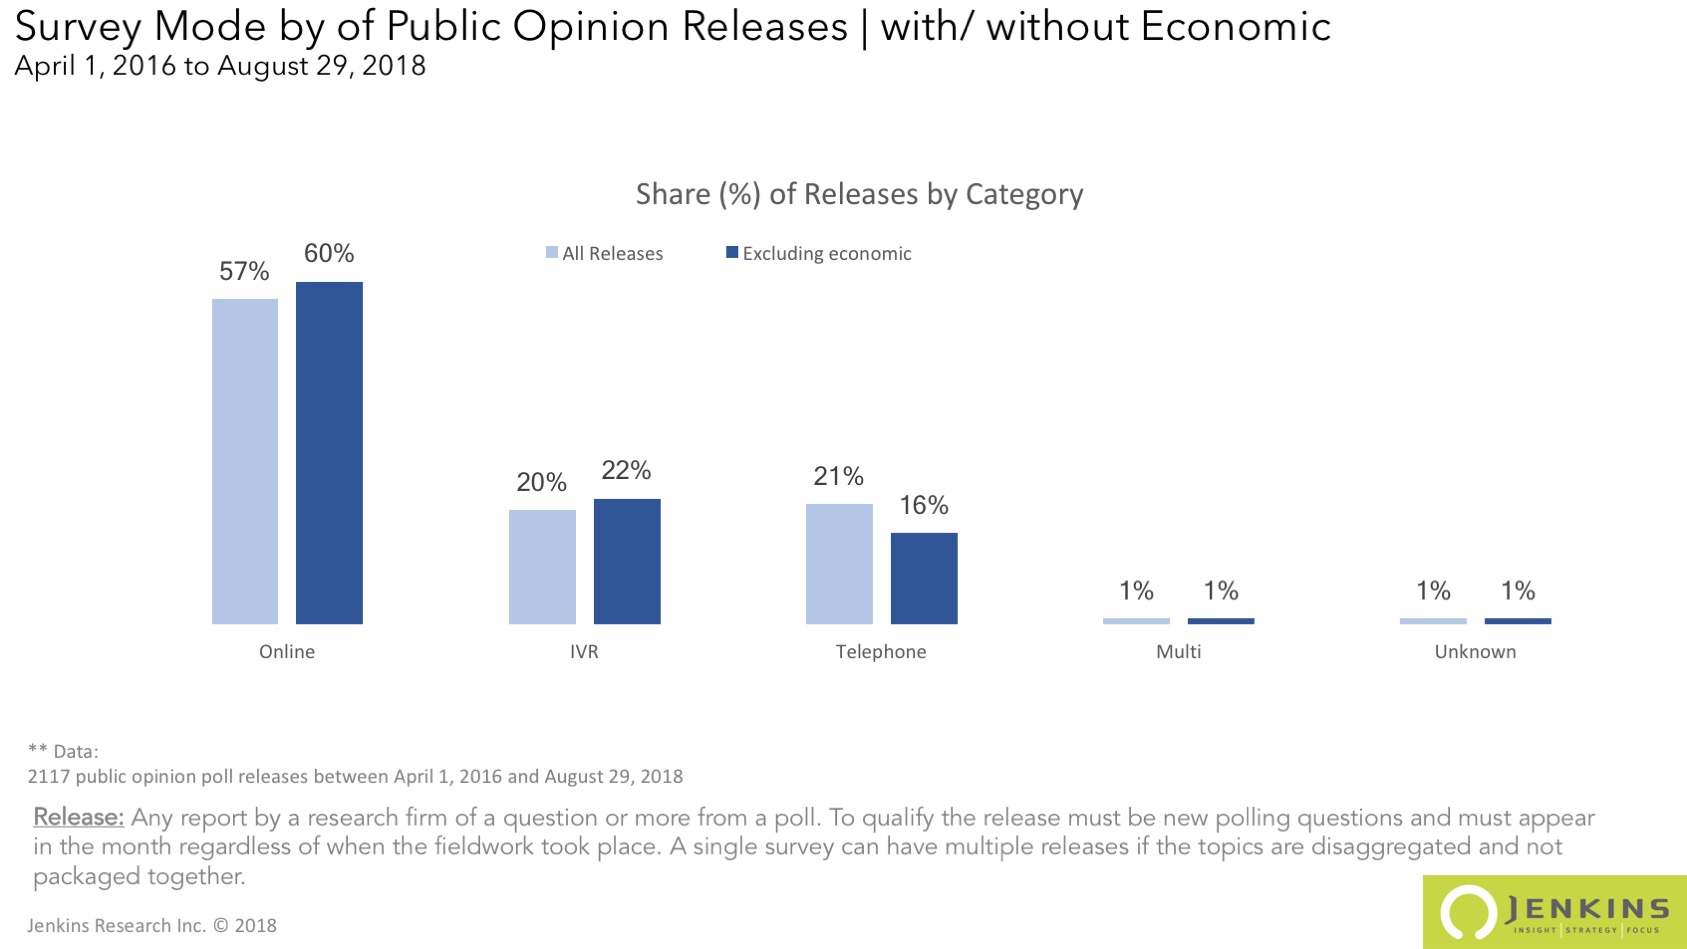 Survey releases by Mode with and without the economy category